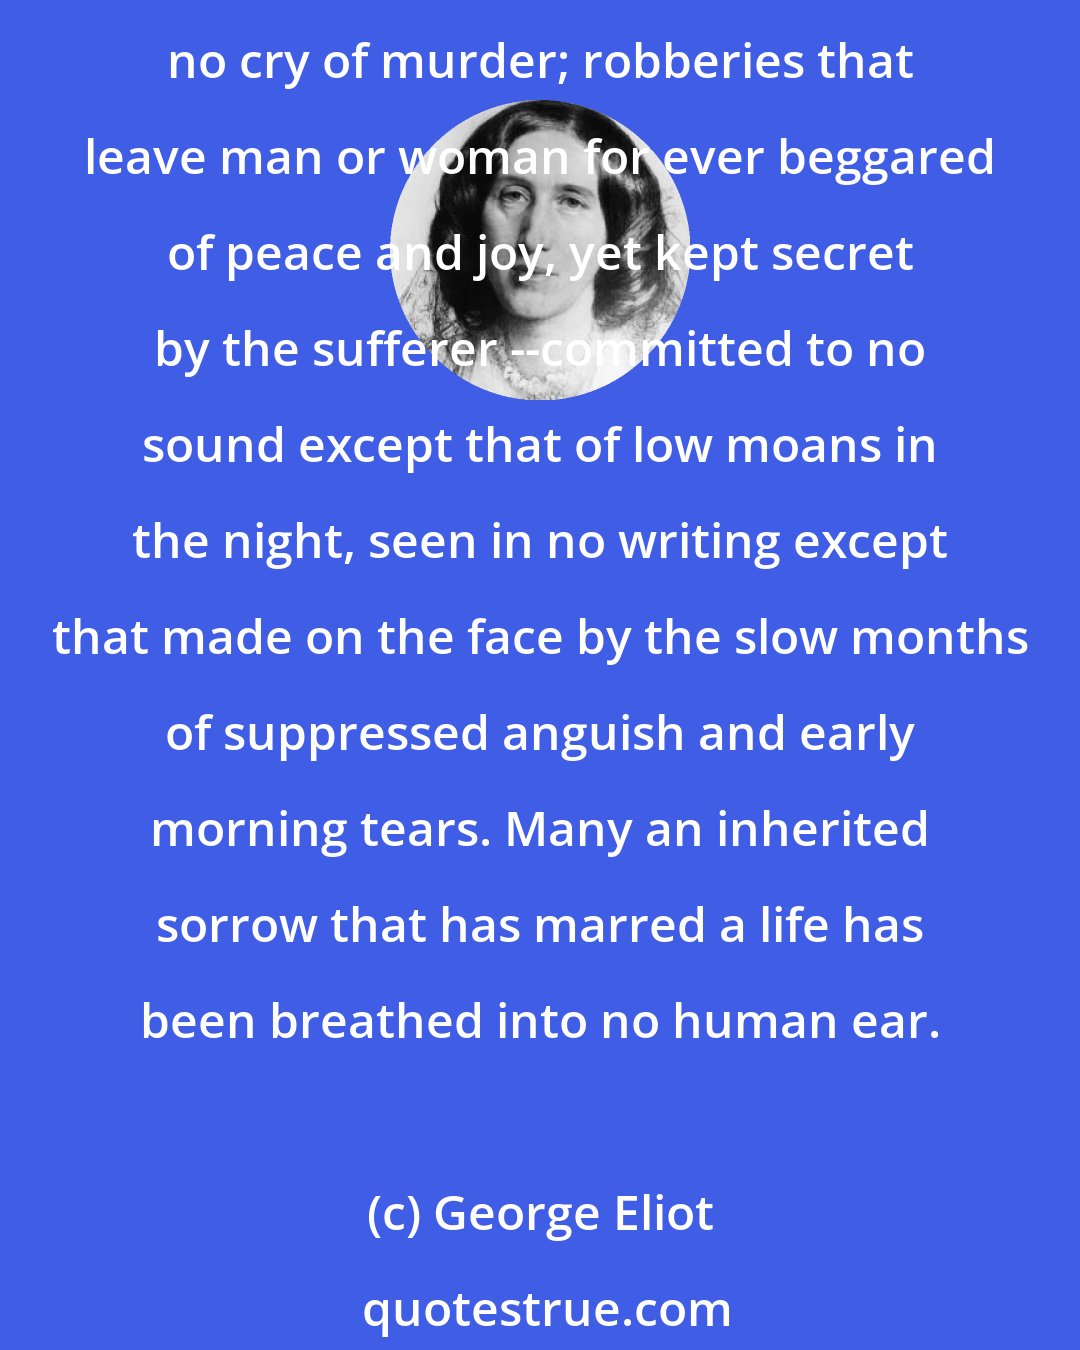 George Eliot: There is much pain that is quite noiseless; and vibrations that make human agonies are often a mere whisper in the roar of hurrying existence. There are glances of hatred that stab and raise no cry of murder; robberies that leave man or woman for ever beggared of peace and joy, yet kept secret by the sufferer --committed to no sound except that of low moans in the night, seen in no writing except that made on the face by the slow months of suppressed anguish and early morning tears. Many an inherited sorrow that has marred a life has been breathed into no human ear.